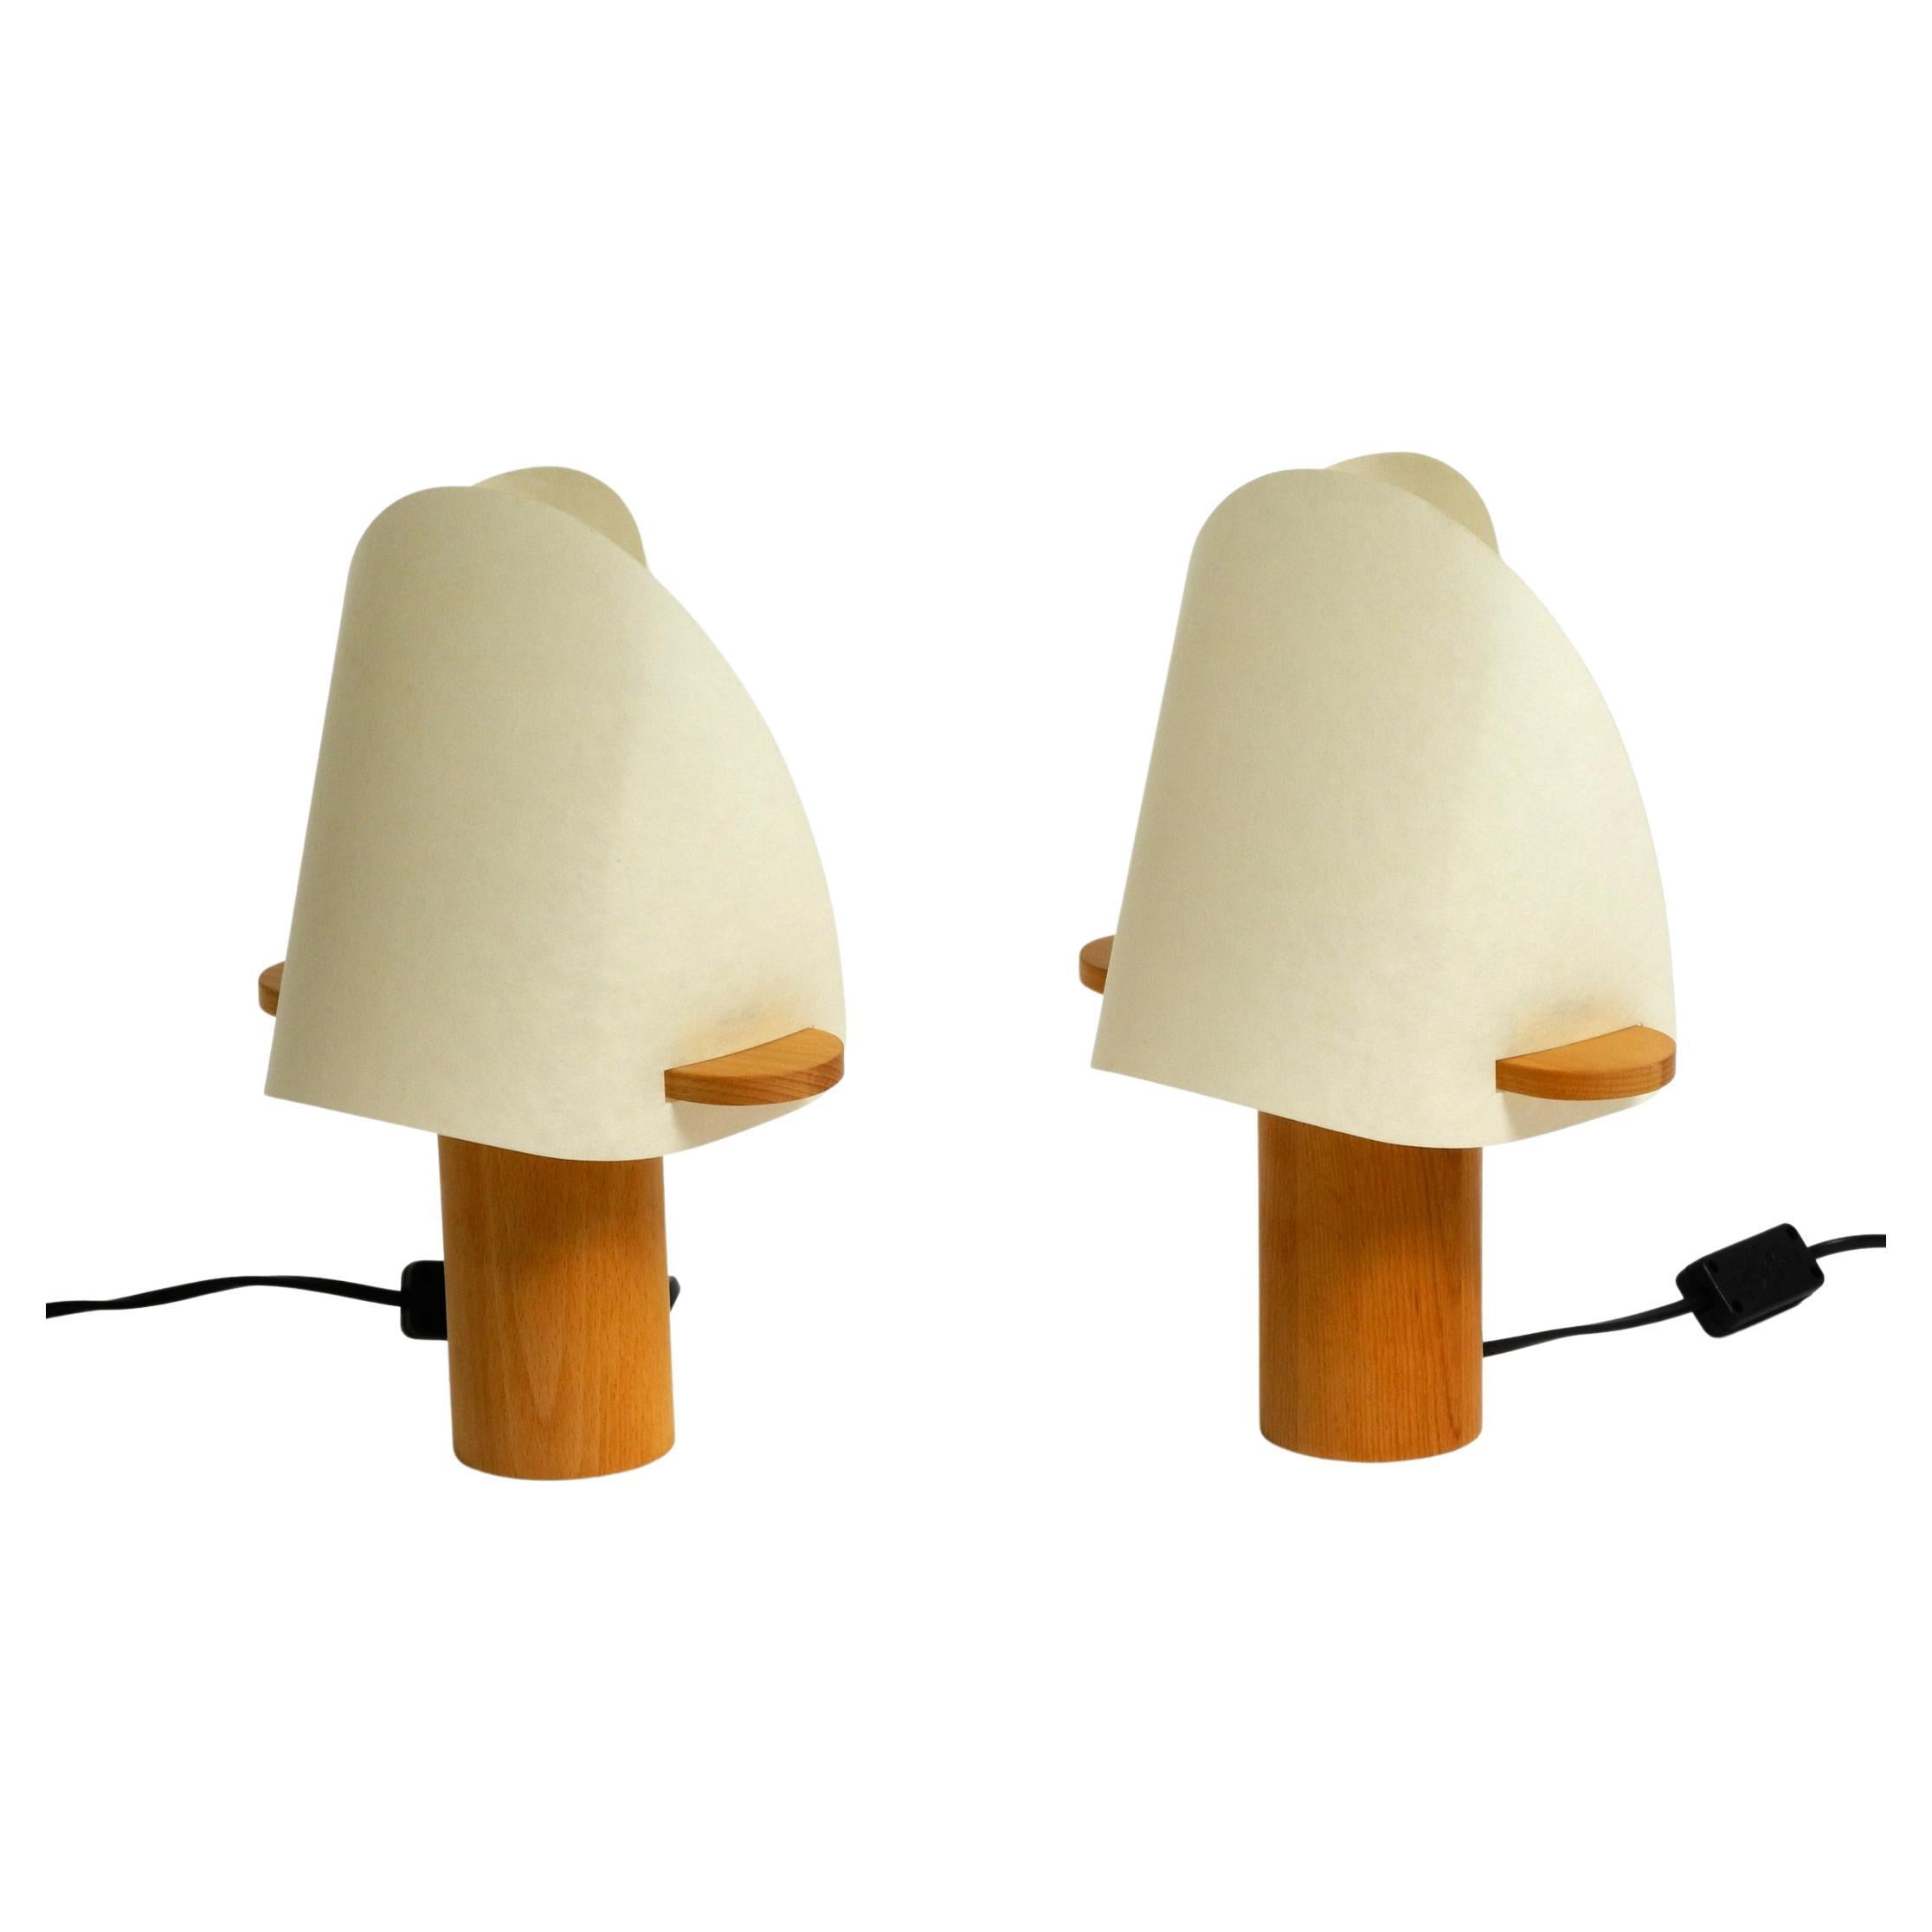 Two Charming Minimalistic Oak Table Lamps with Lunopal Shades by Domus  1980s For Sale